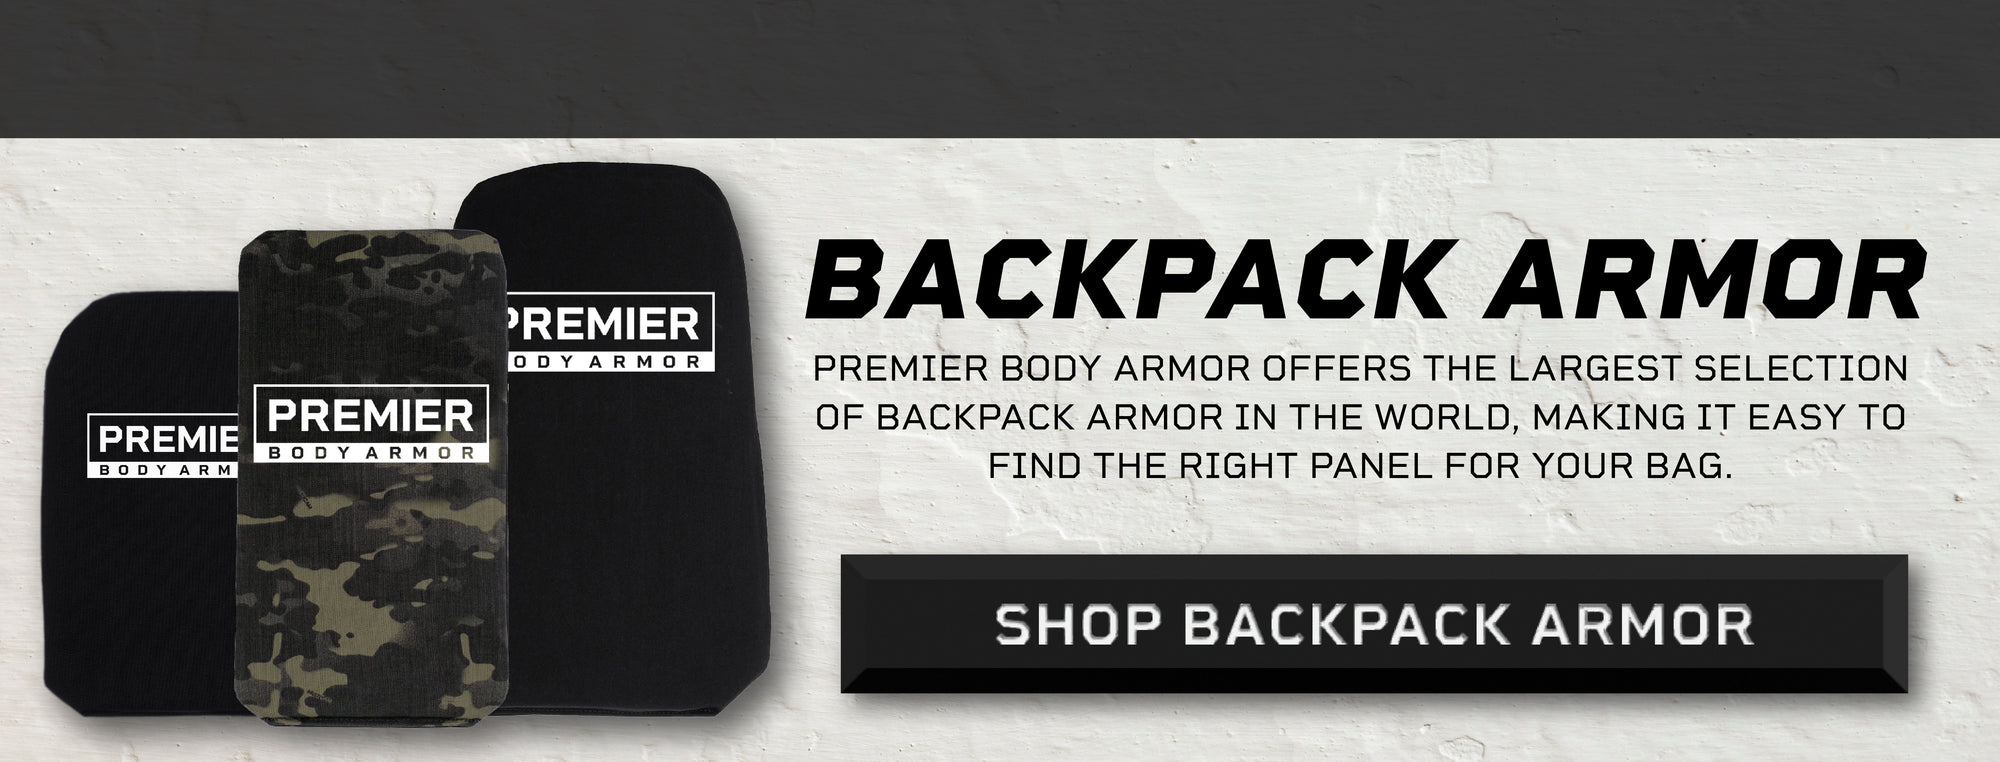 Premier Body Armor Company uses the same materials from their bulletproof vests to create bulletproof backpacks for kids. Shop the largest selection of ballistic panels to add lightweight level 3a soft body armor to your backpack! 